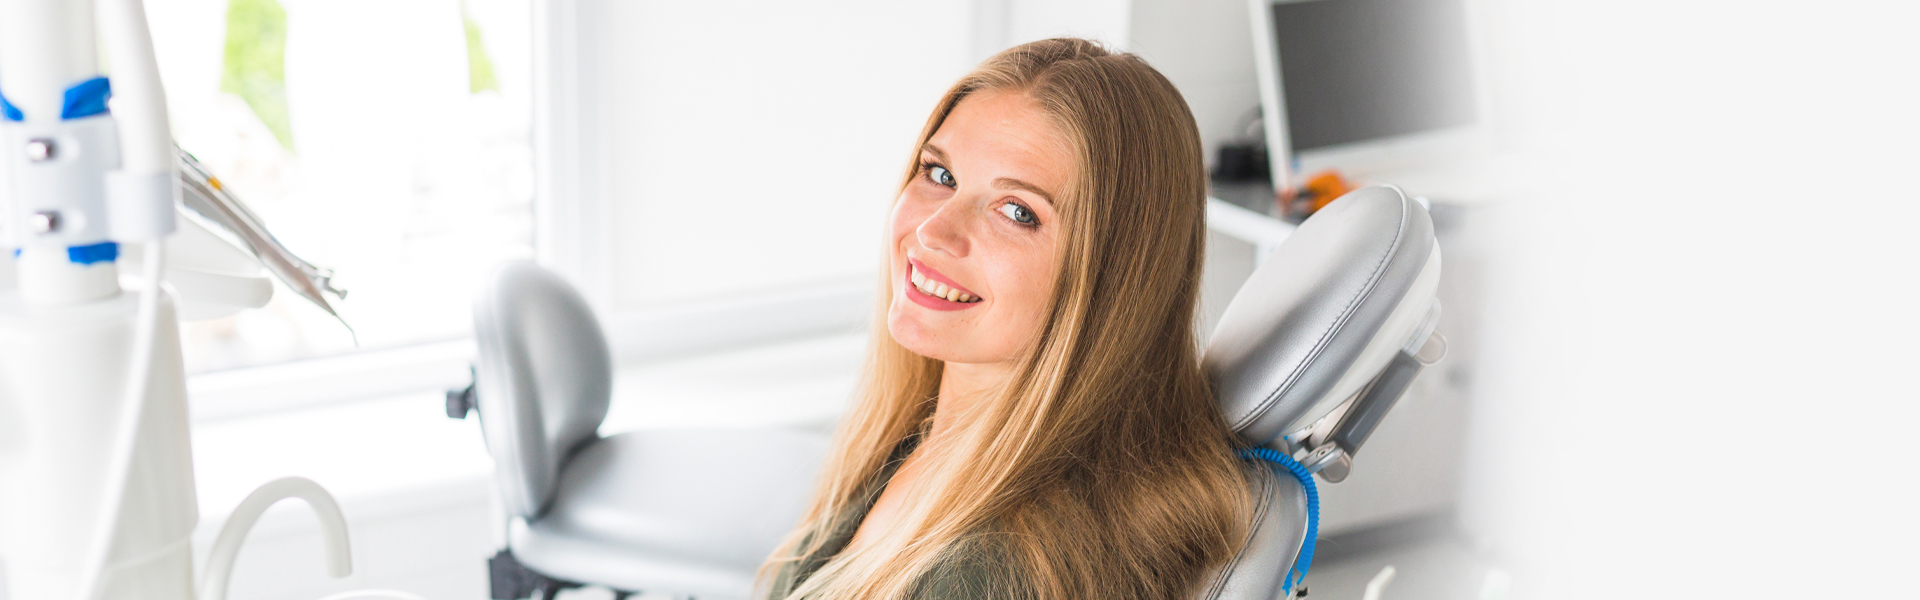 Top 4 ways to be ready for your next dental visit